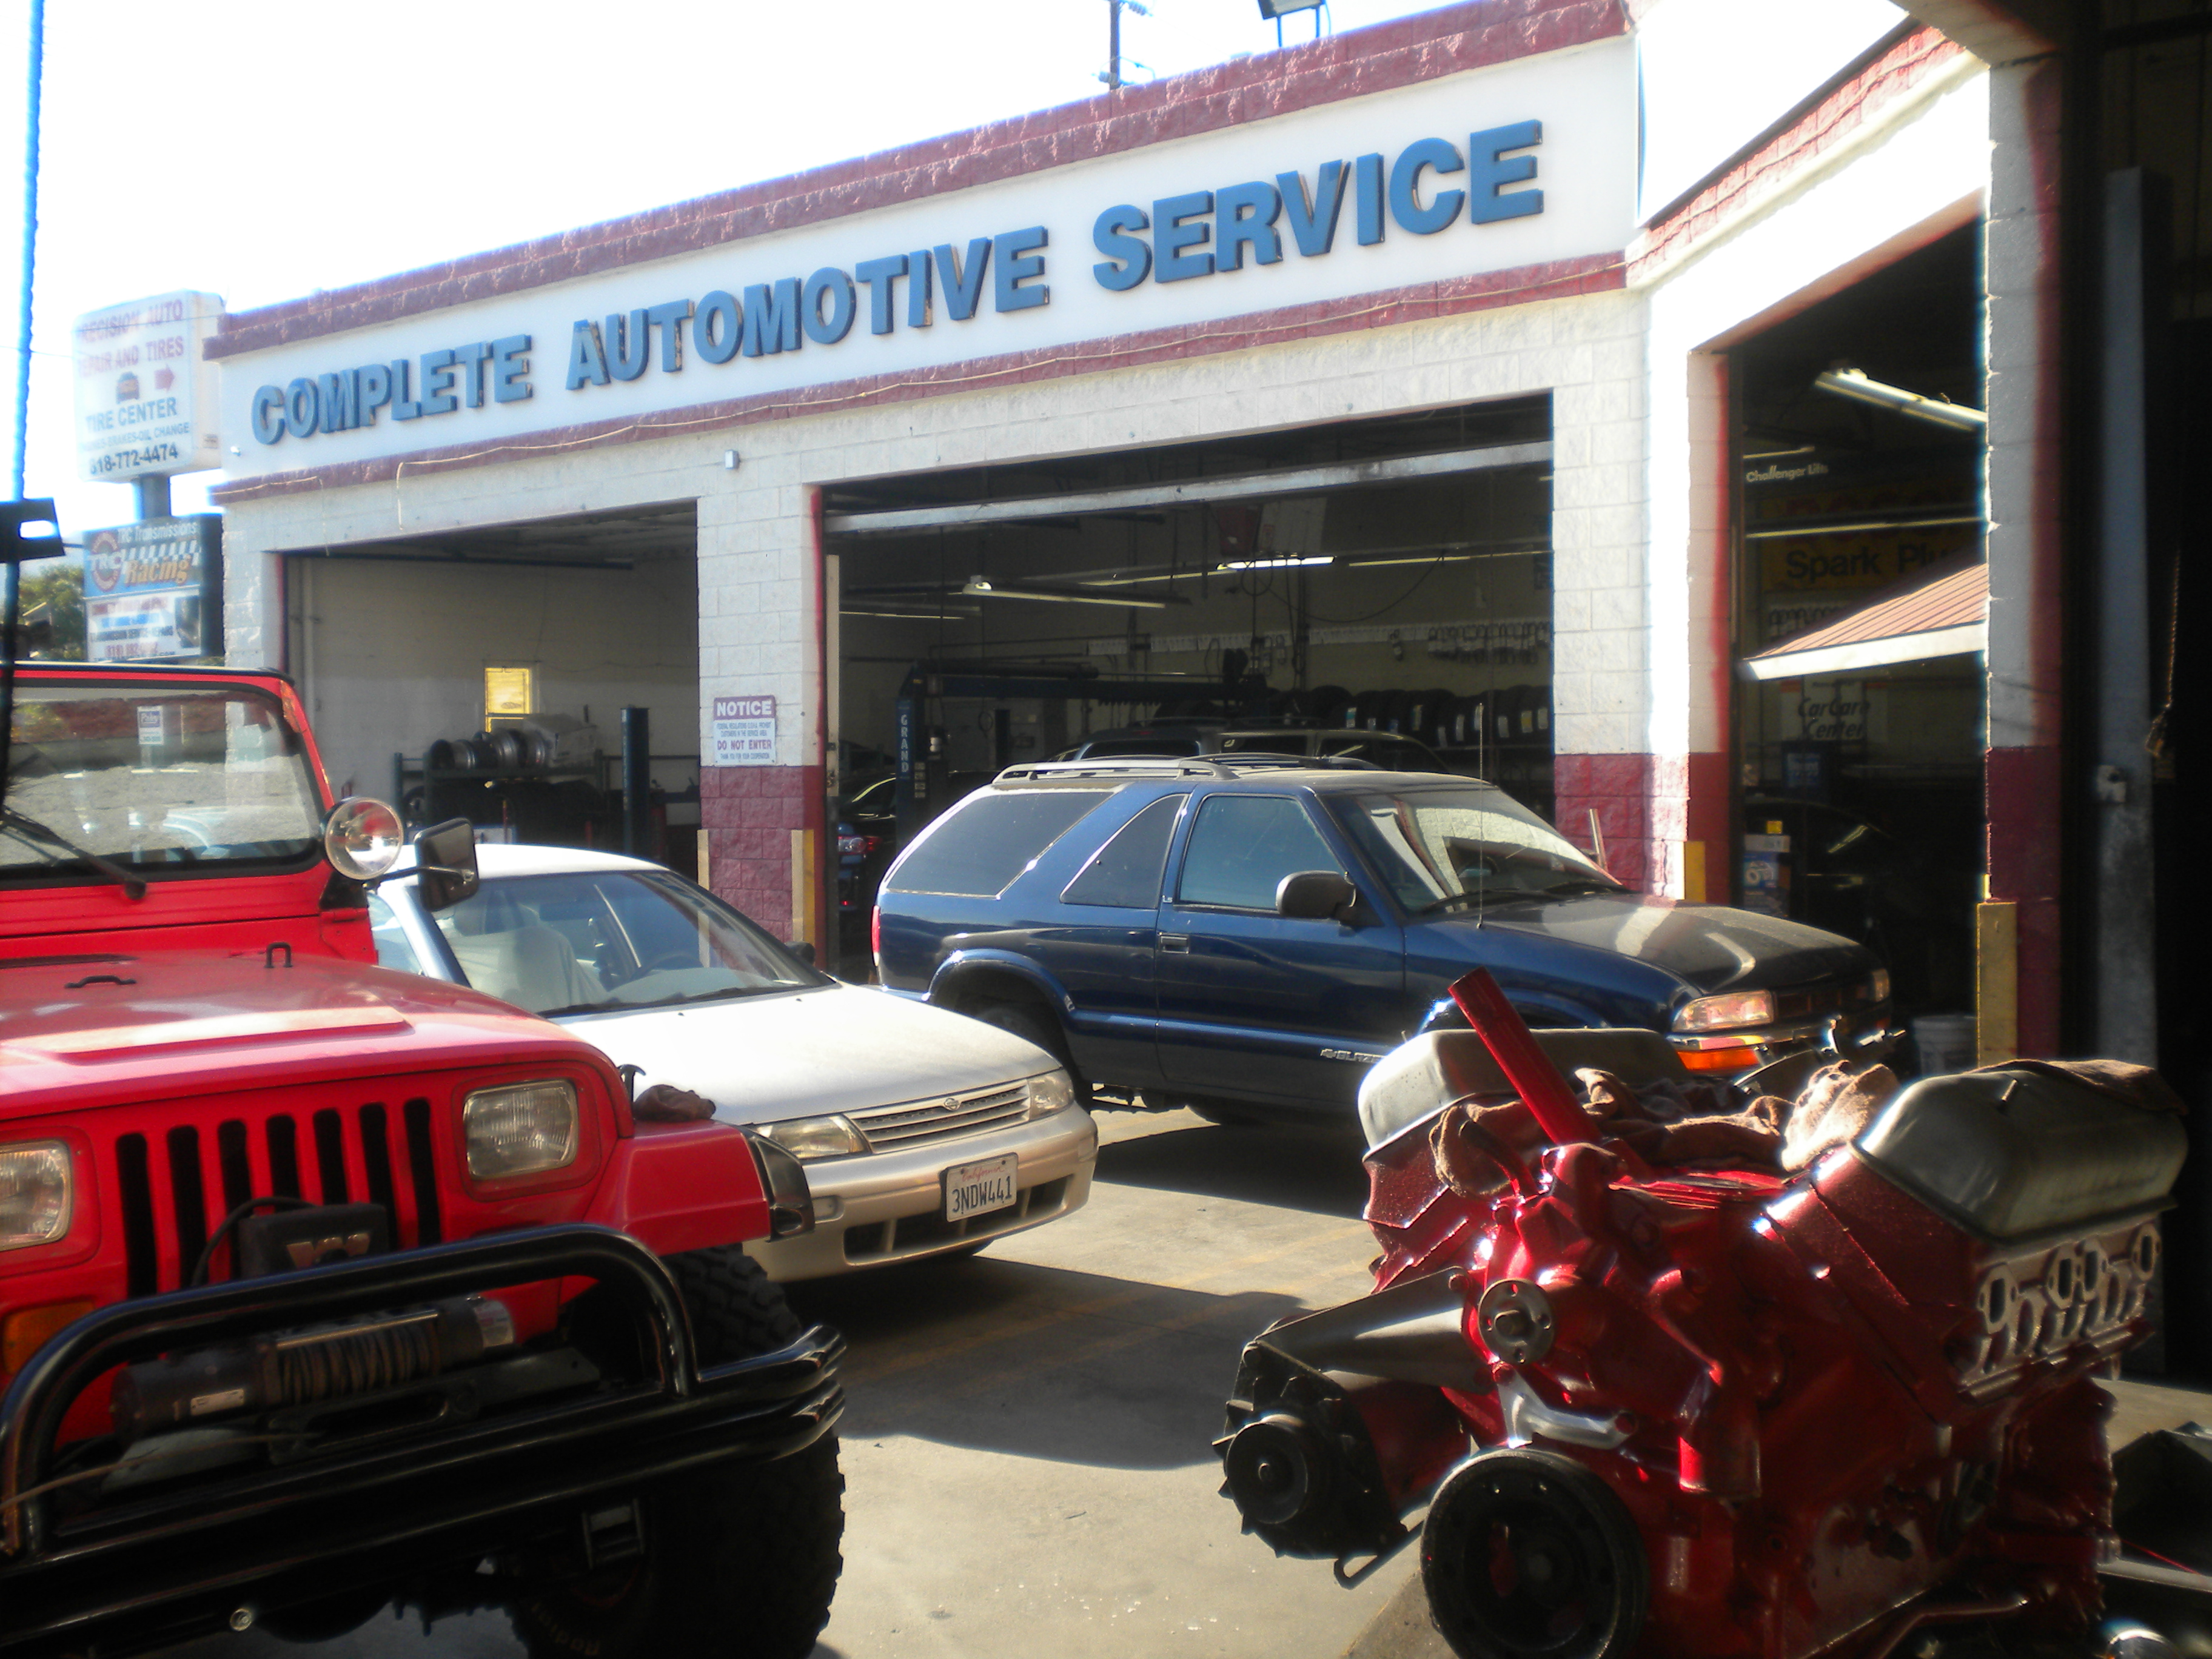 Precision Auto Repair And Tires workplace 2